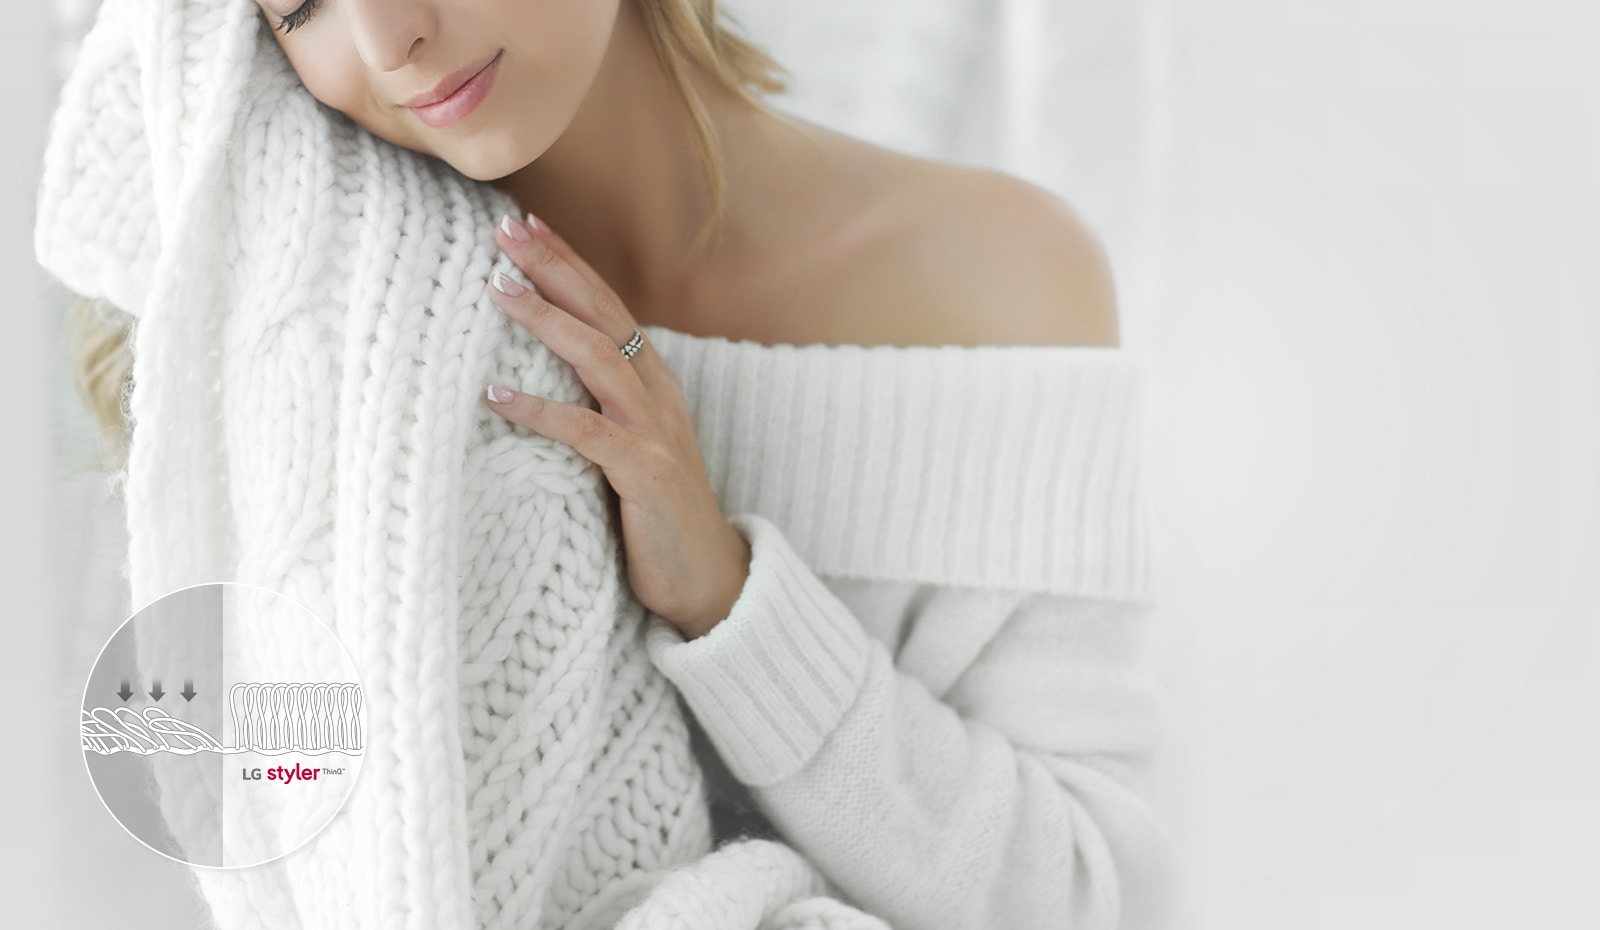 It shows a woman wearing a thick knit is feeling the softness of the knit.